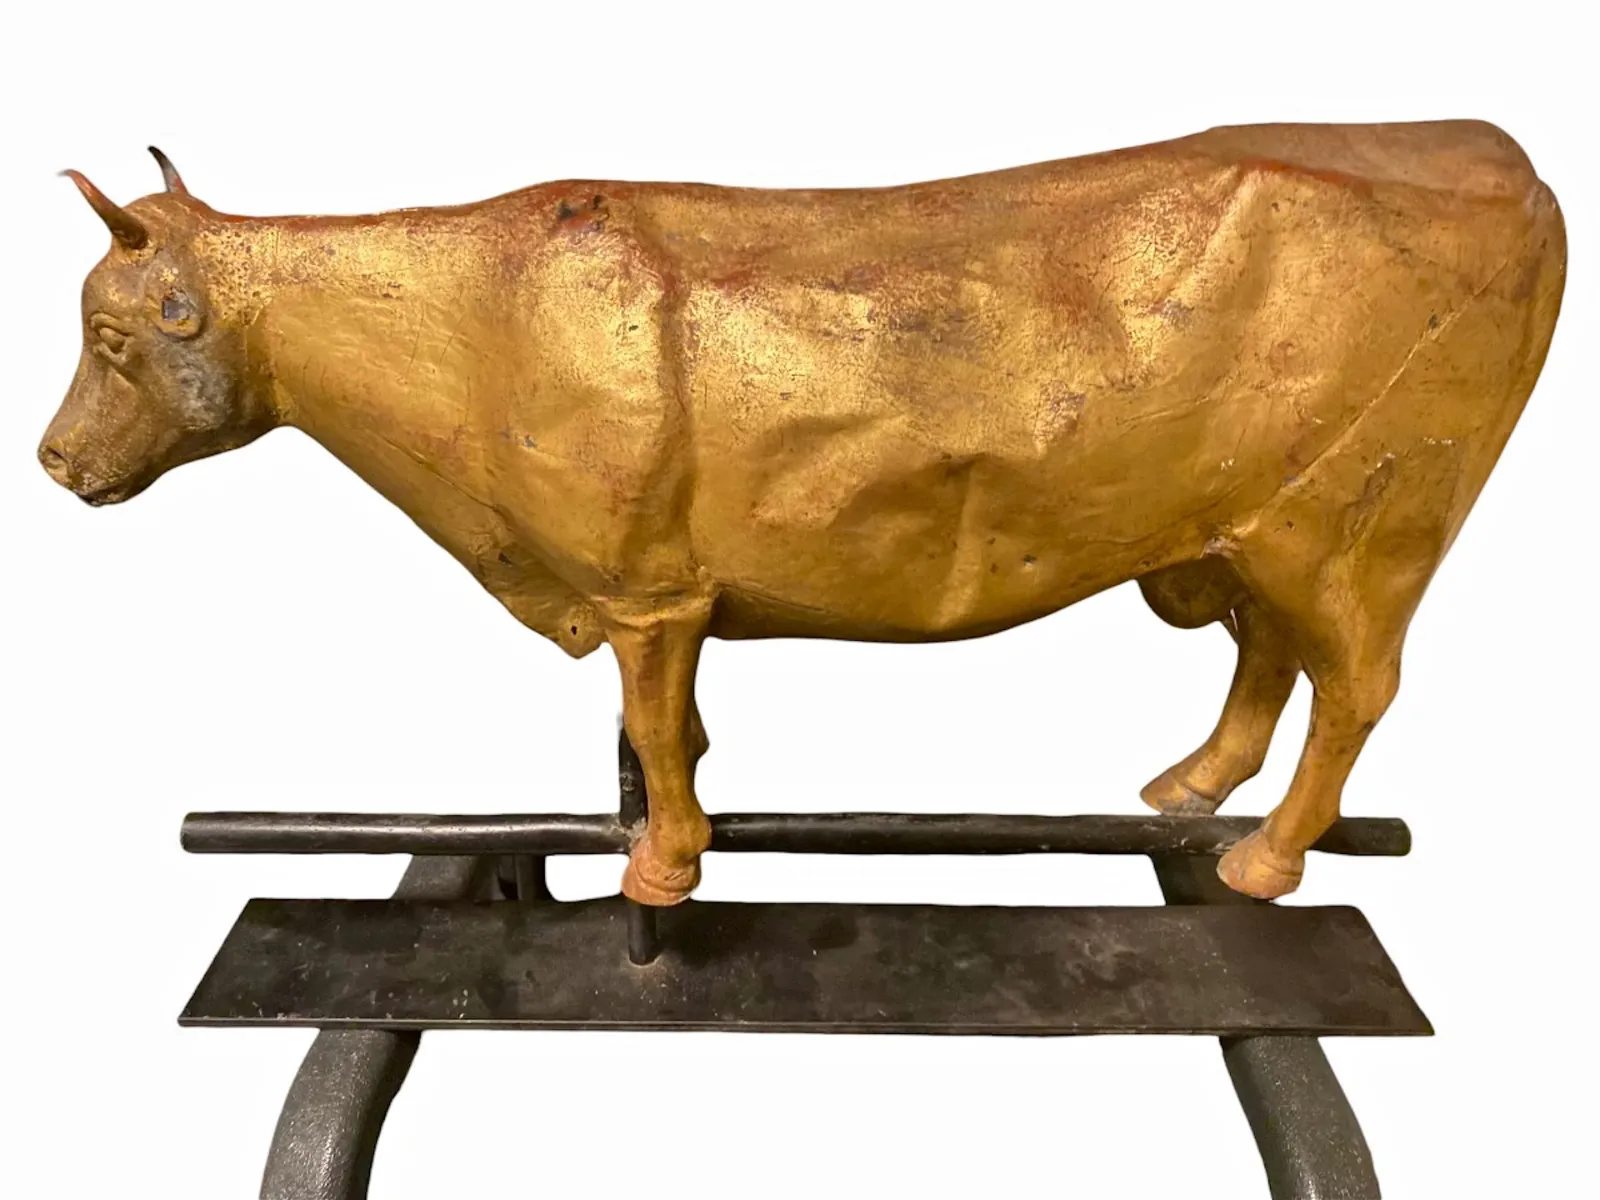 Gilt copper cow weathervane, Moorcroft pottery and a belsnickle appears at Kensington Dec. 11